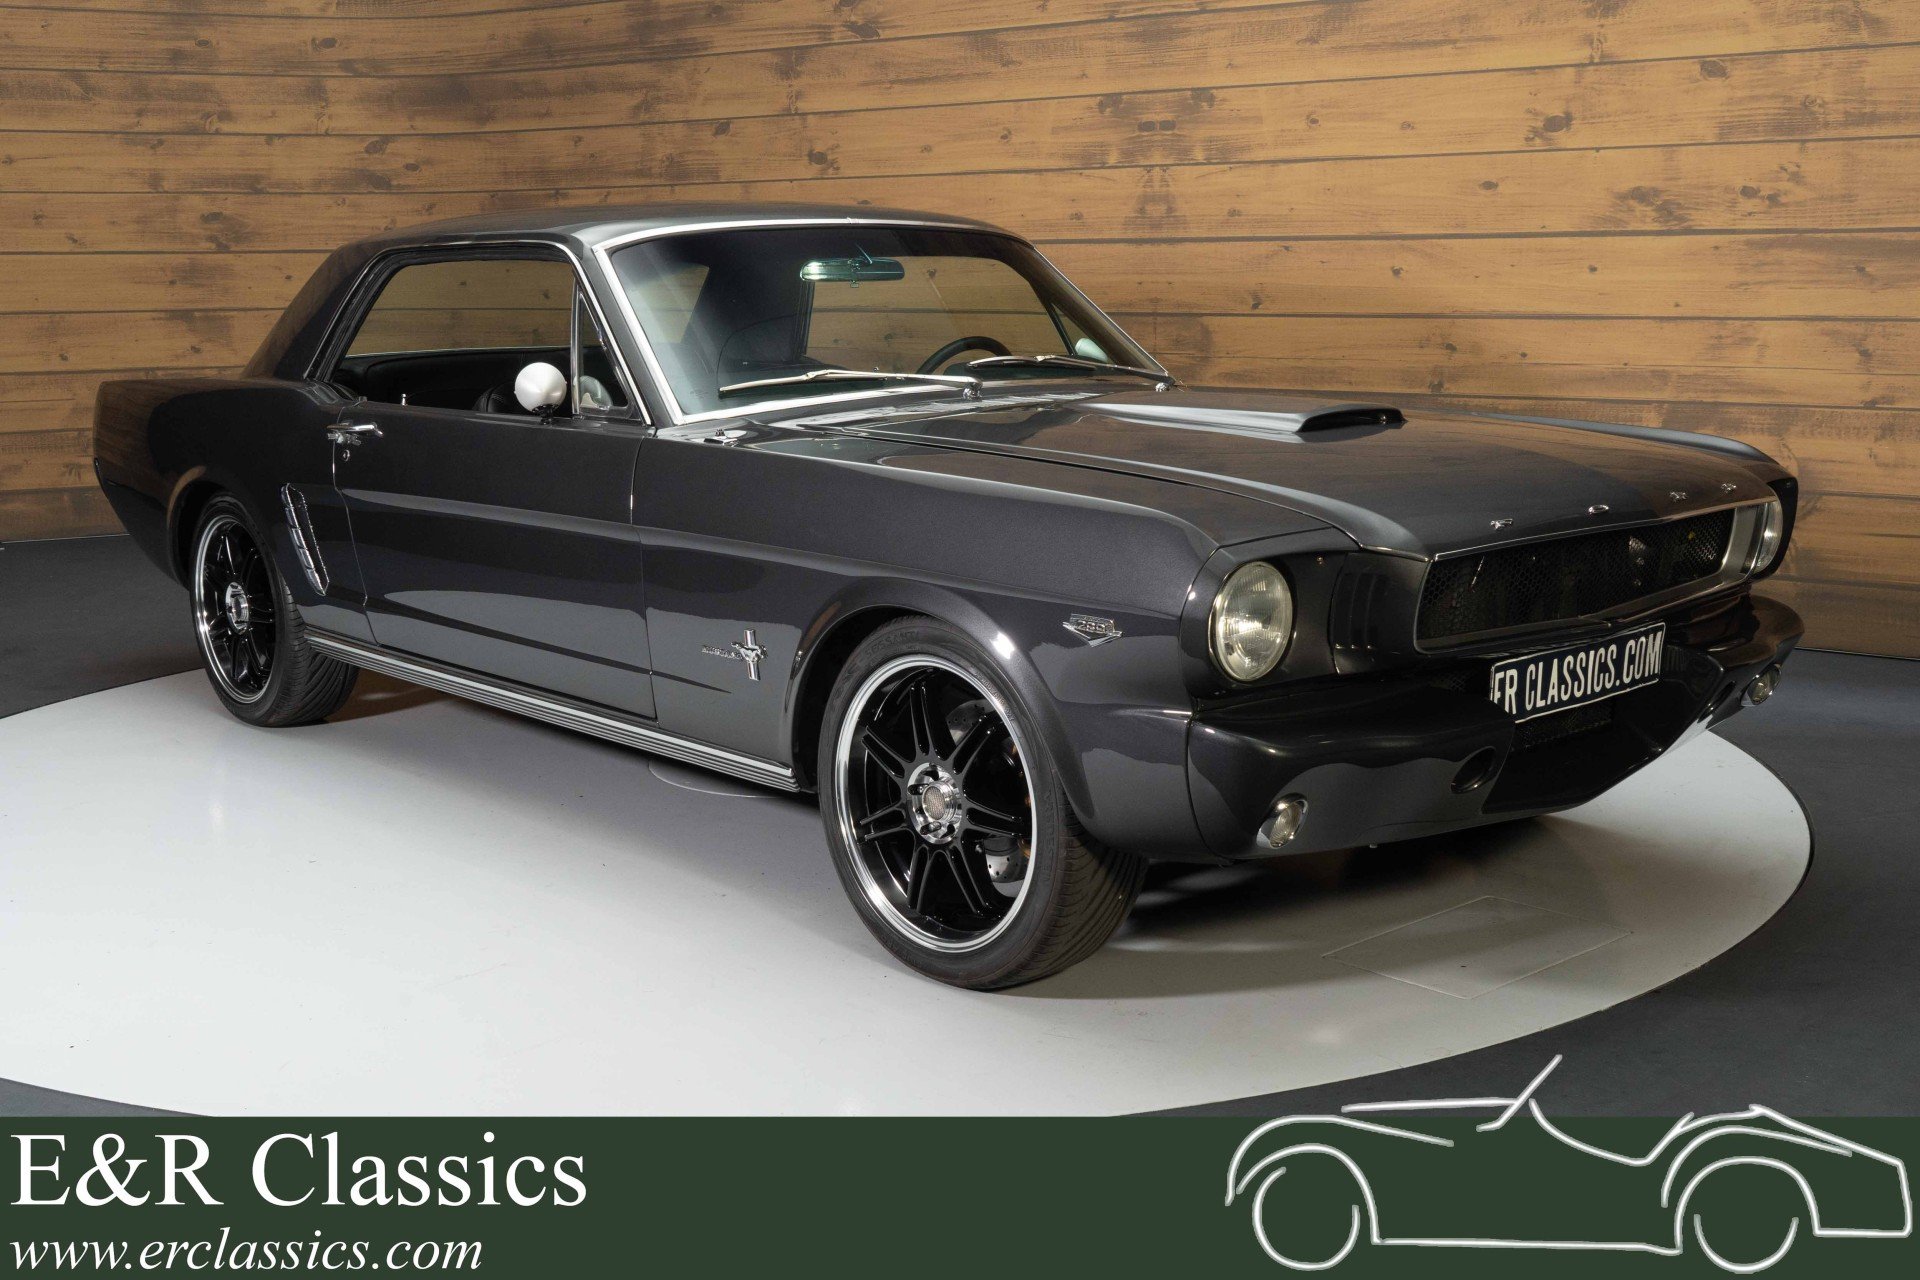 Ford Mustang Coupe Pro Touring for sale at ERclassics